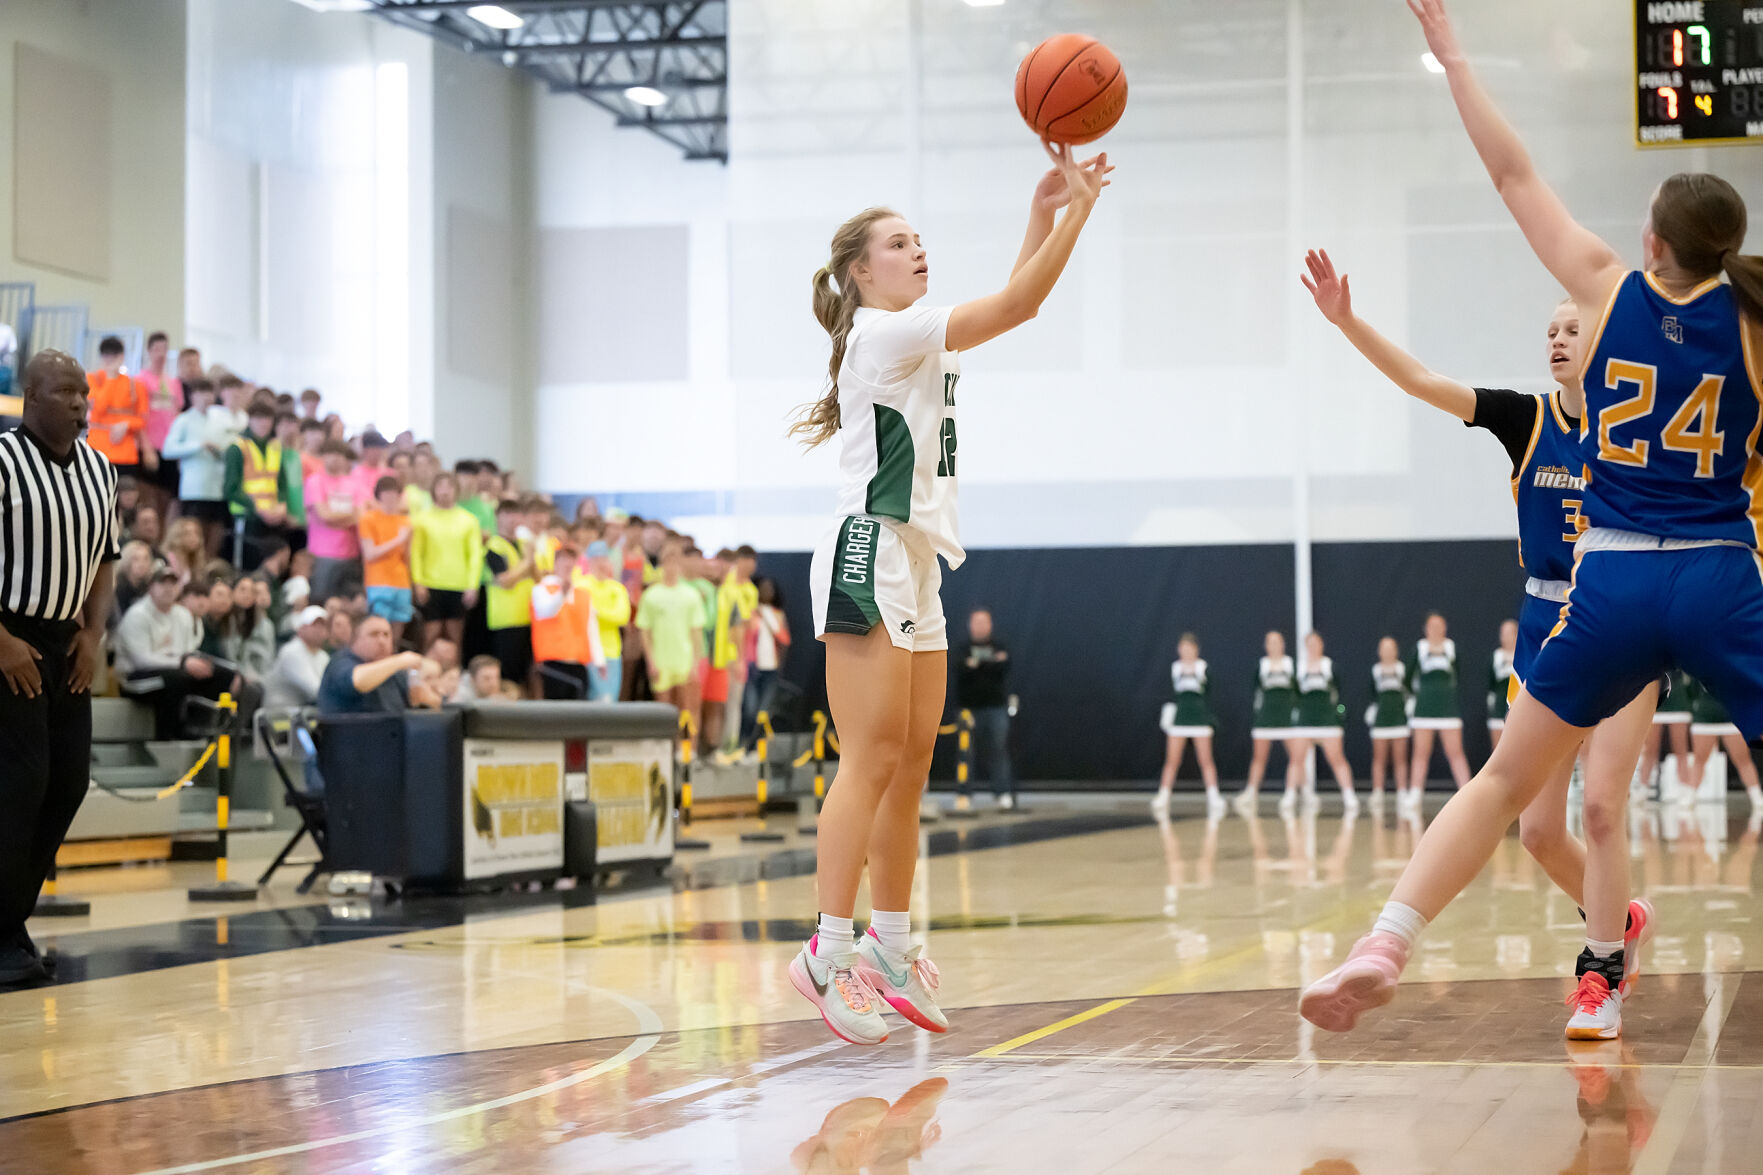 Taylor Schwalenberg leads KML to decisive victory in WIAA sectional final